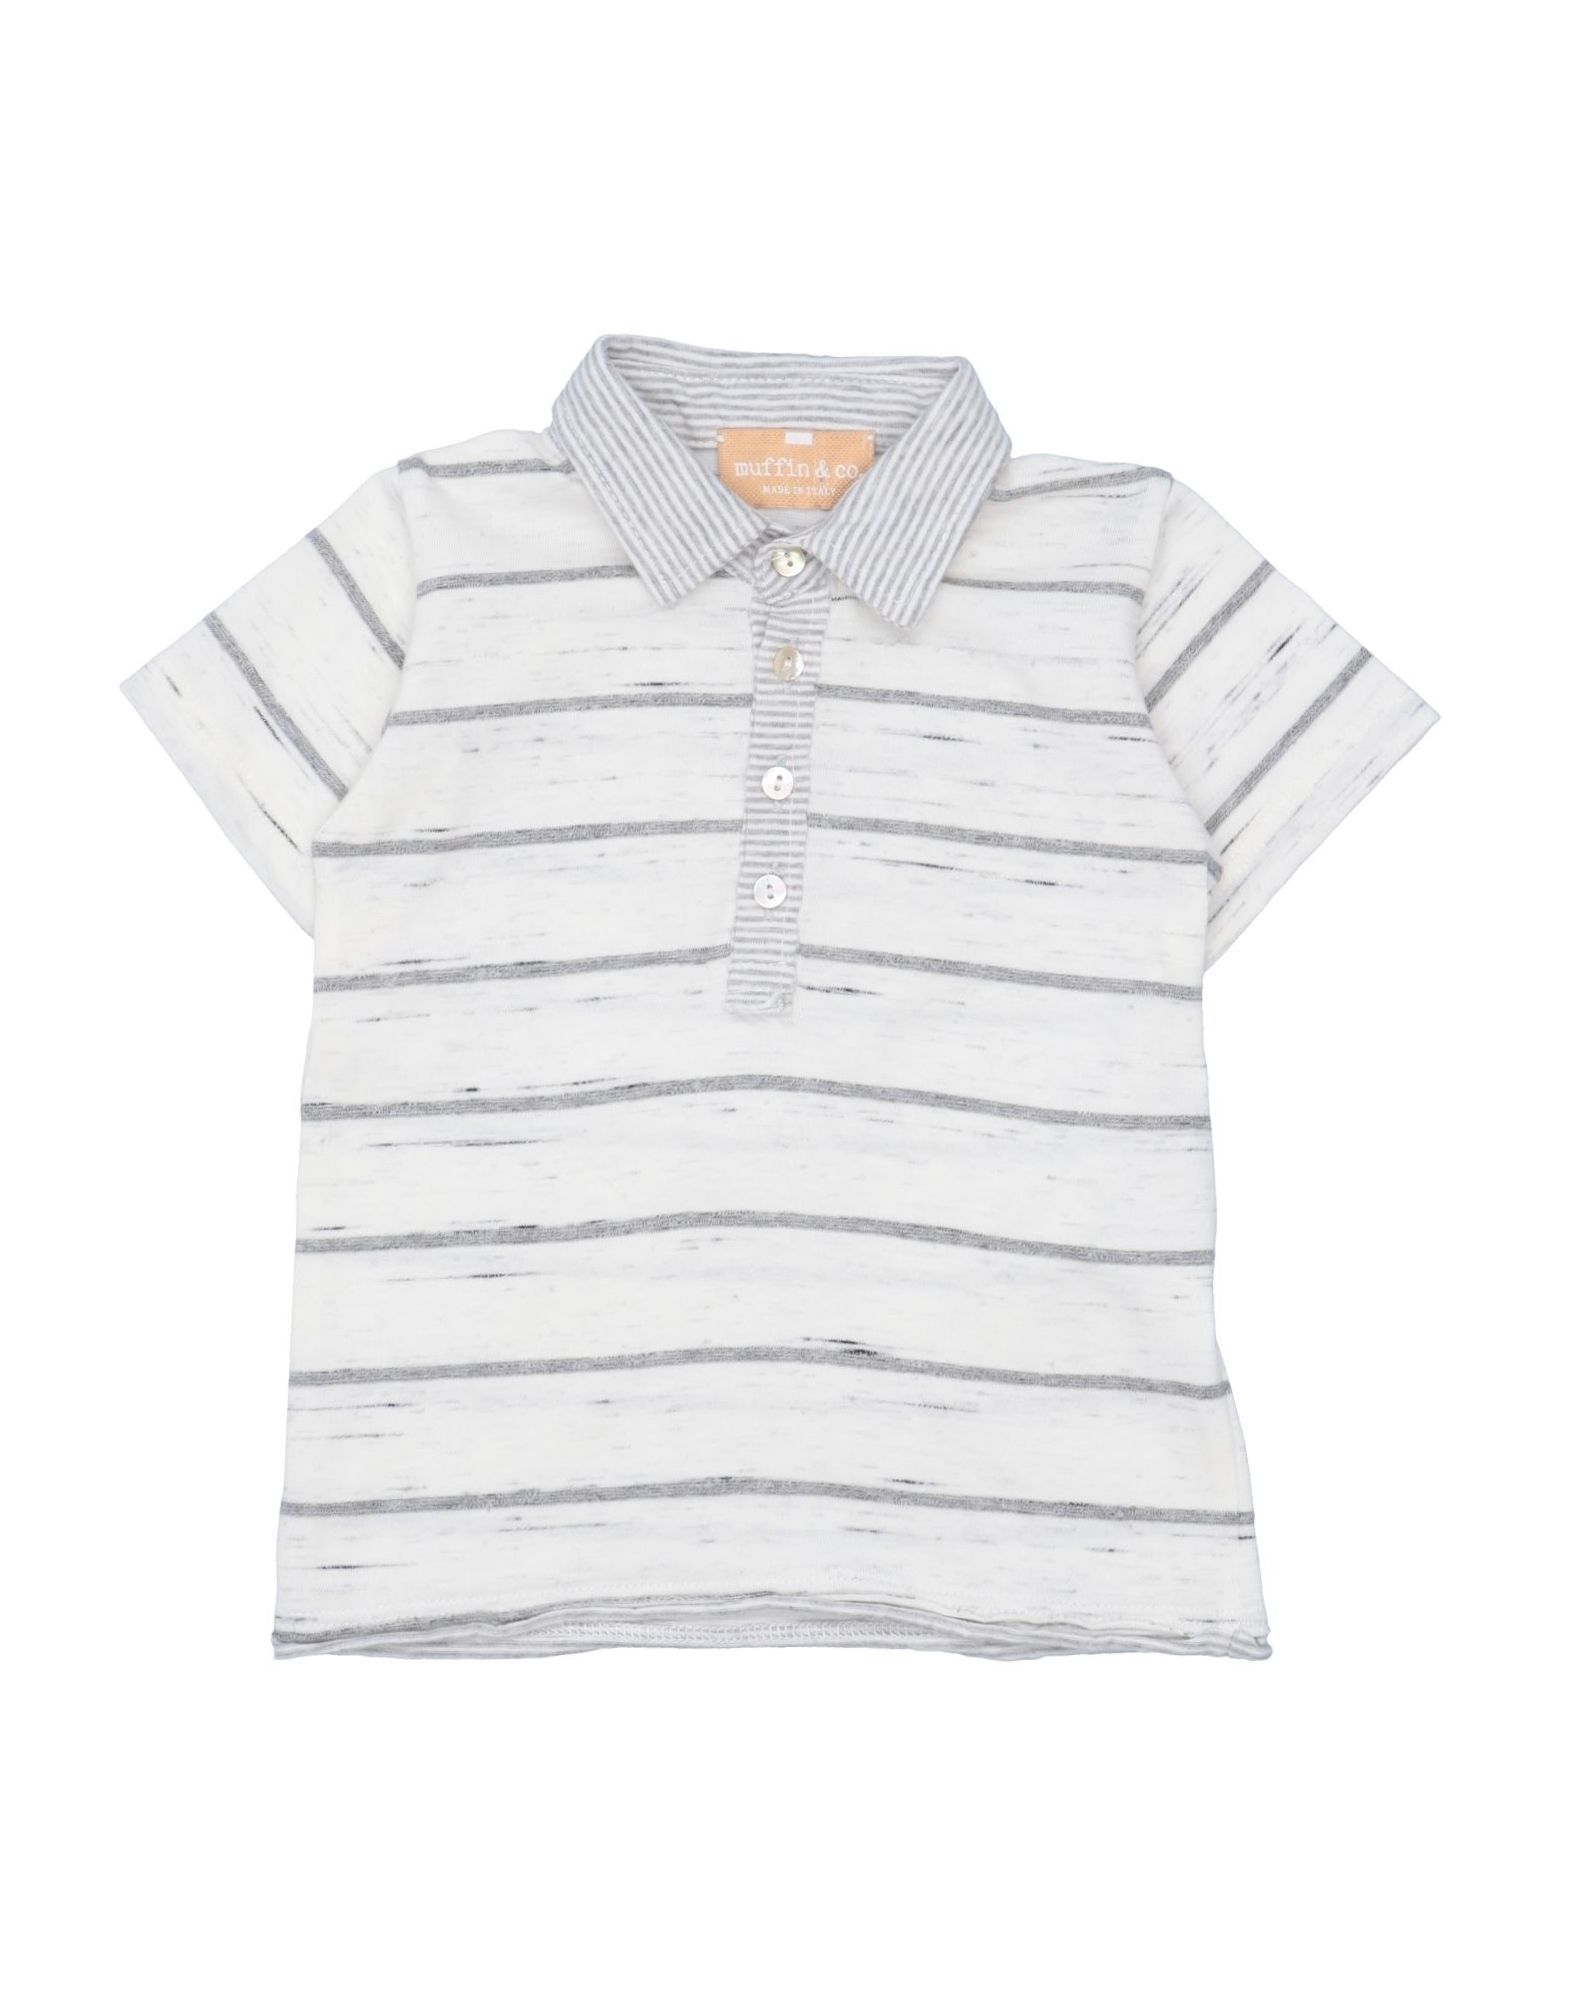 Muffin & Co. Kids' Polo Shirts In Ivory